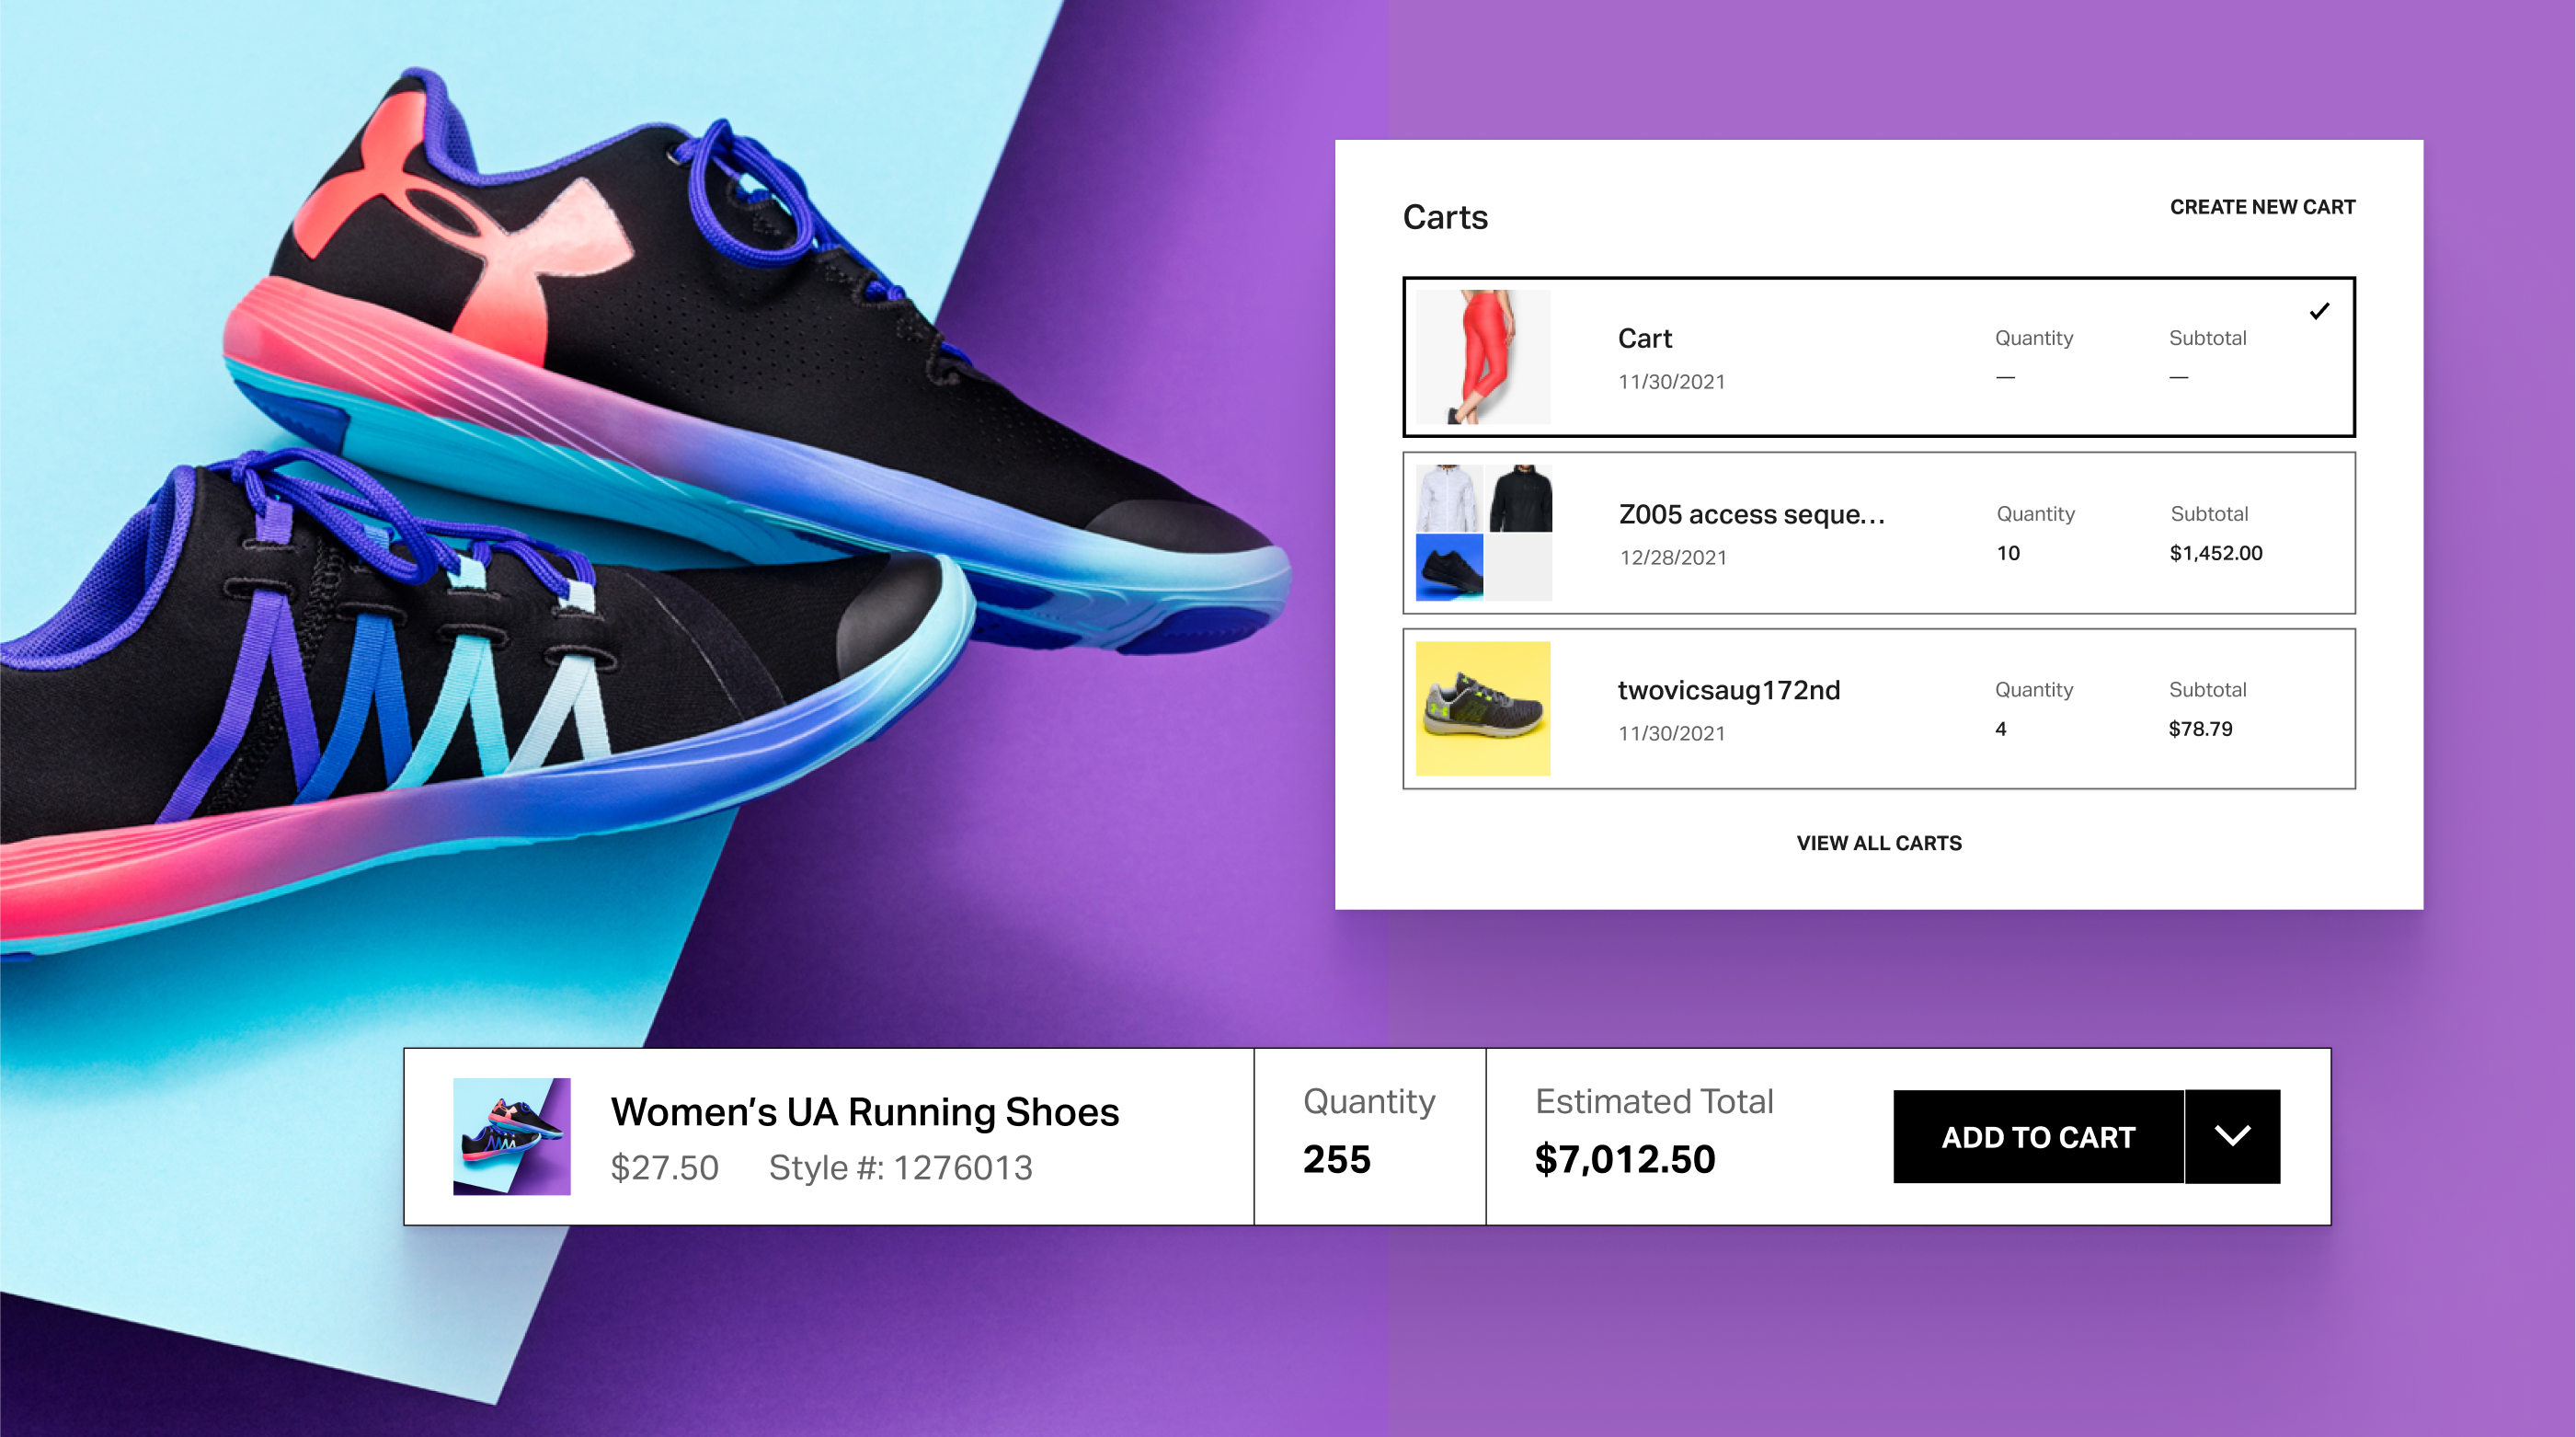 UI/UX internationalization of Under Armour’s front end